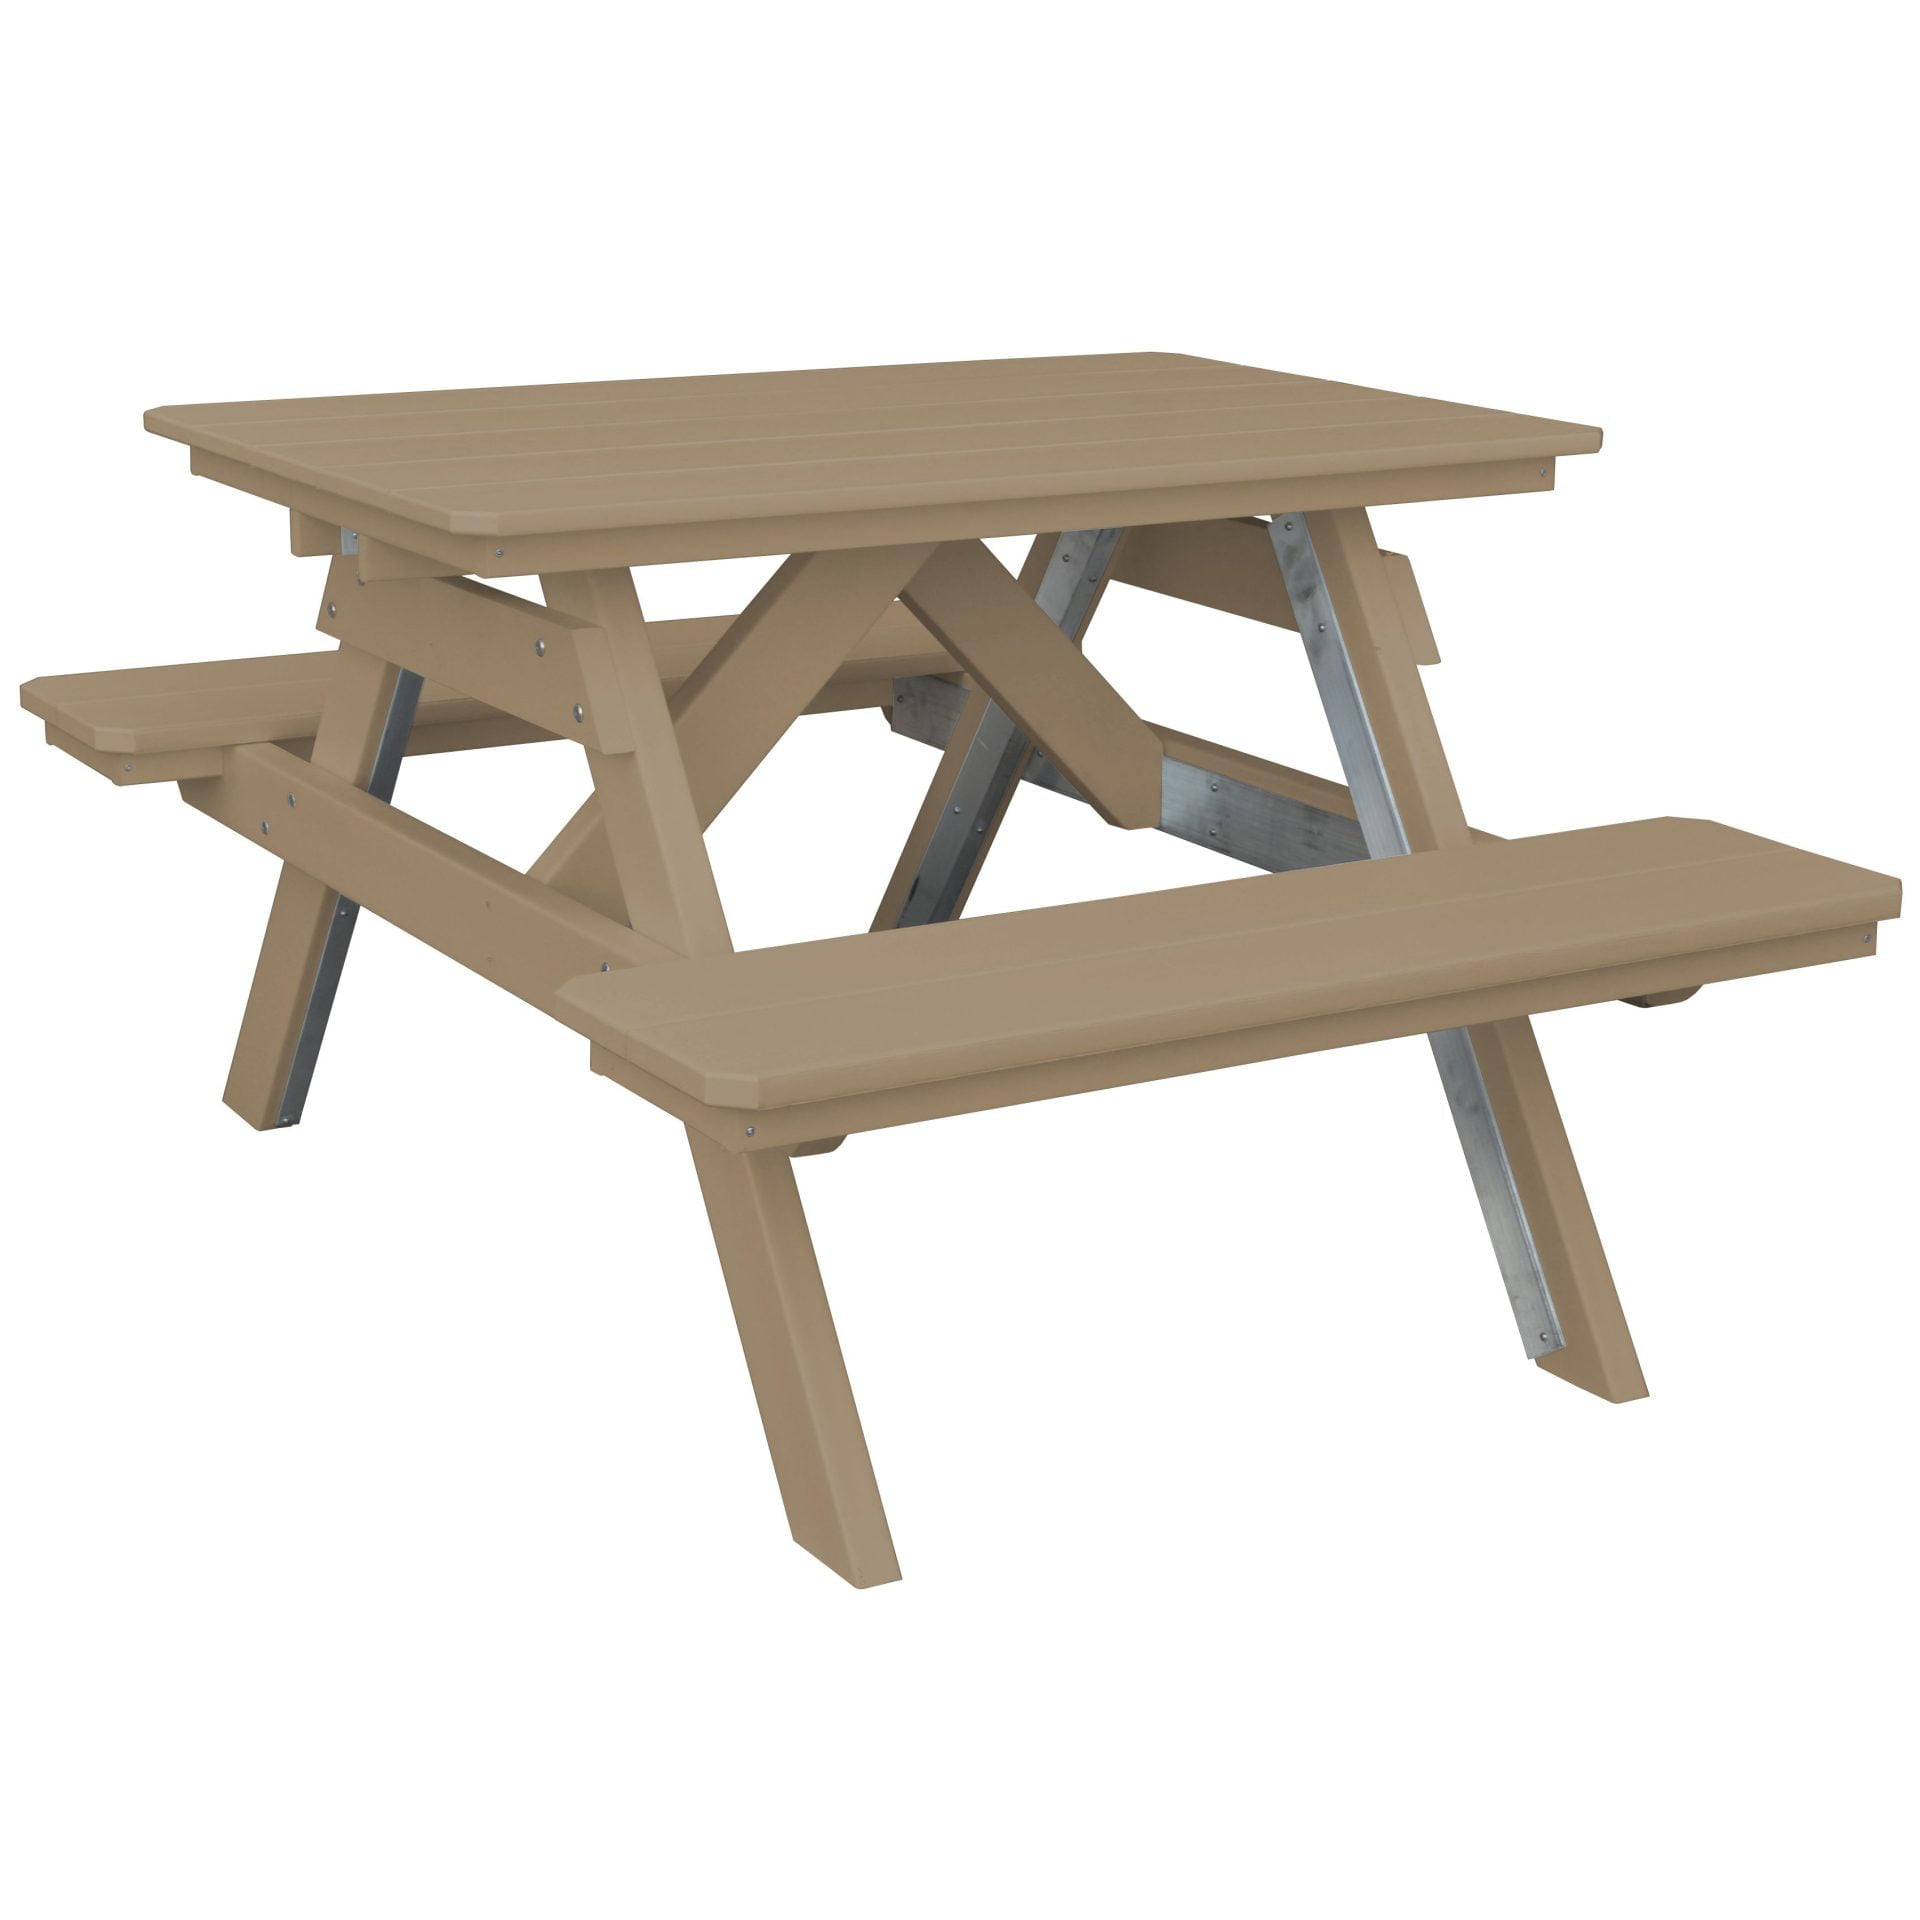 Poly Lumber Picnic Table with Attached Benches